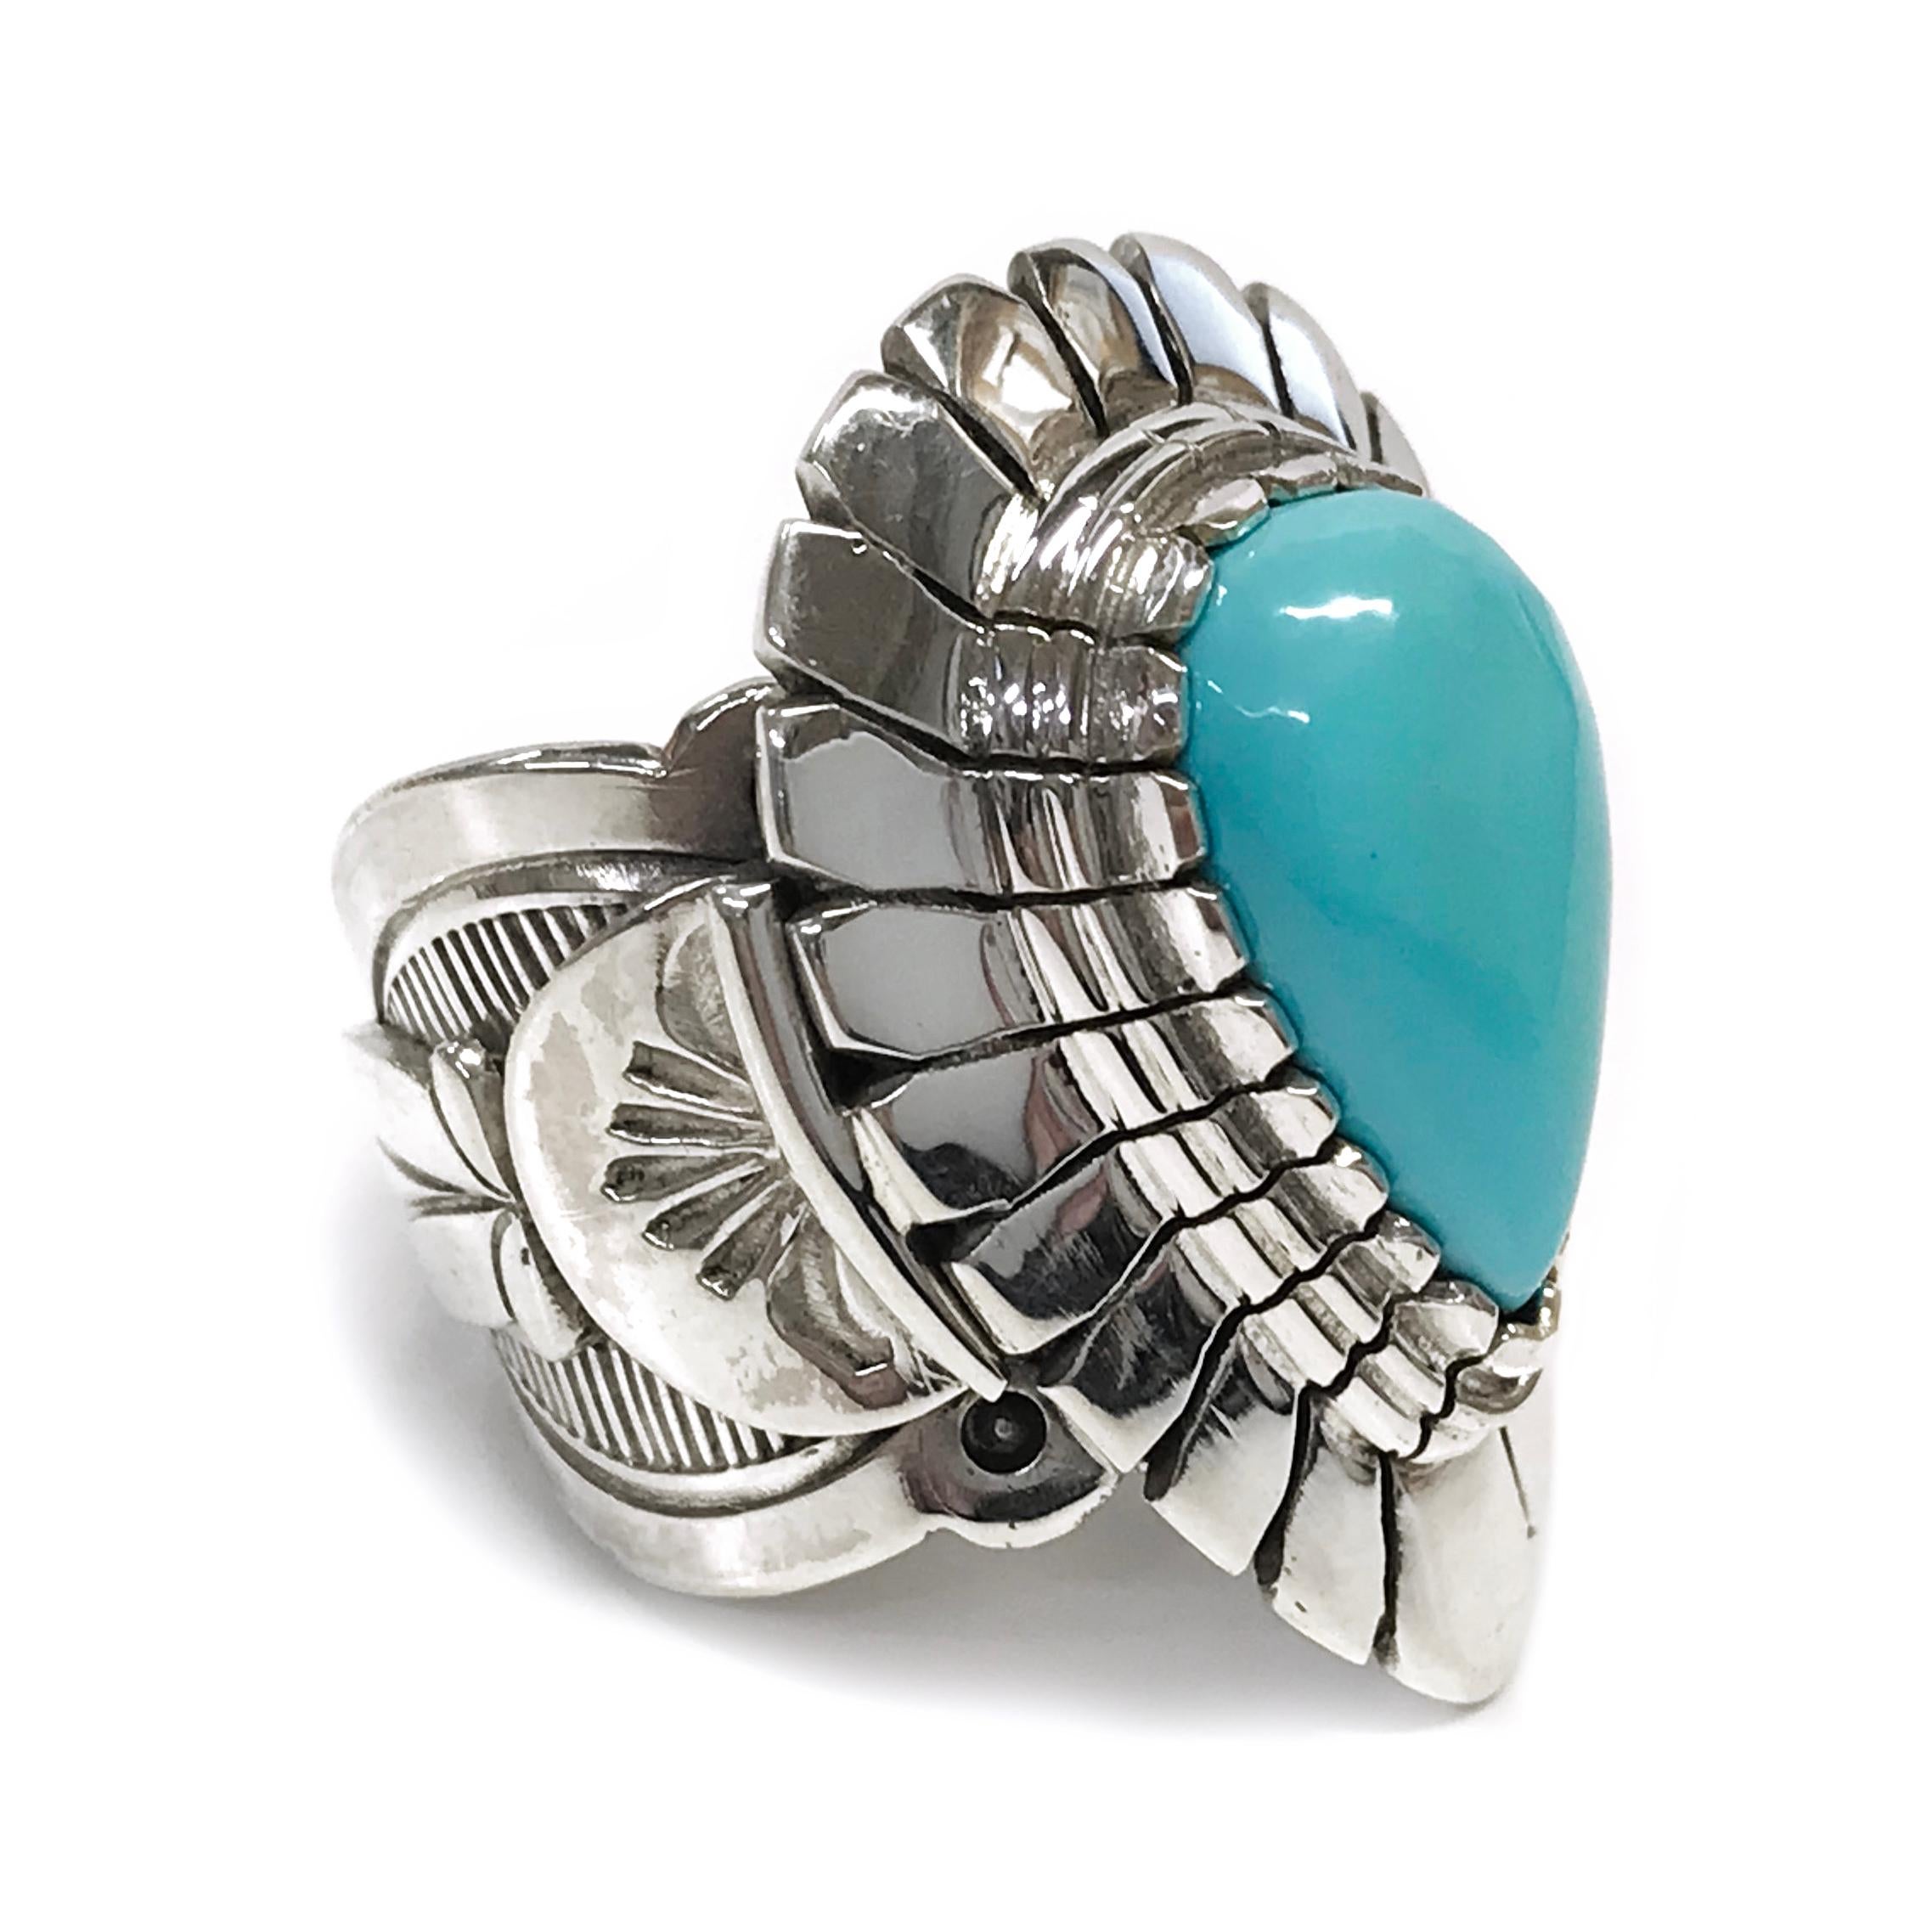 Handcrafted from sterling silver by jewelry maker, Ray Winner. This beautiful ring features a pear-shape natural Sleeping Beauty Turquoise cabochon set in a fabulous wide Native American-inspired design band and bezel. The ring measures 29.5mm high